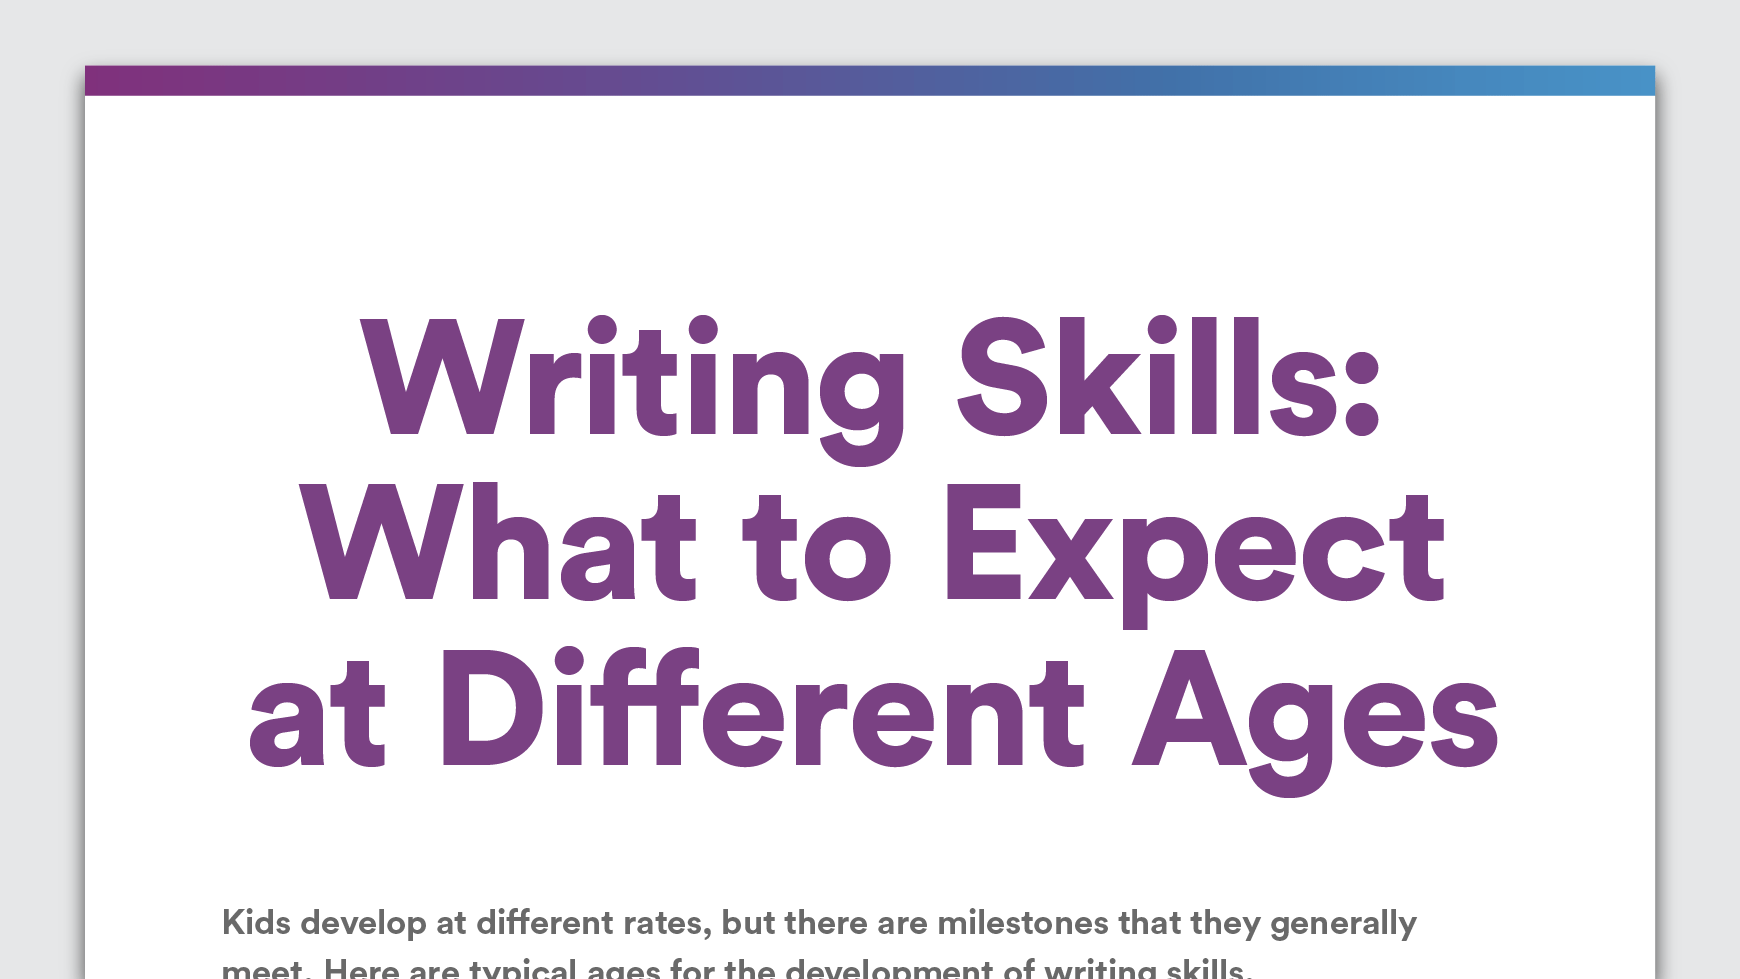 Writing skills at different ages